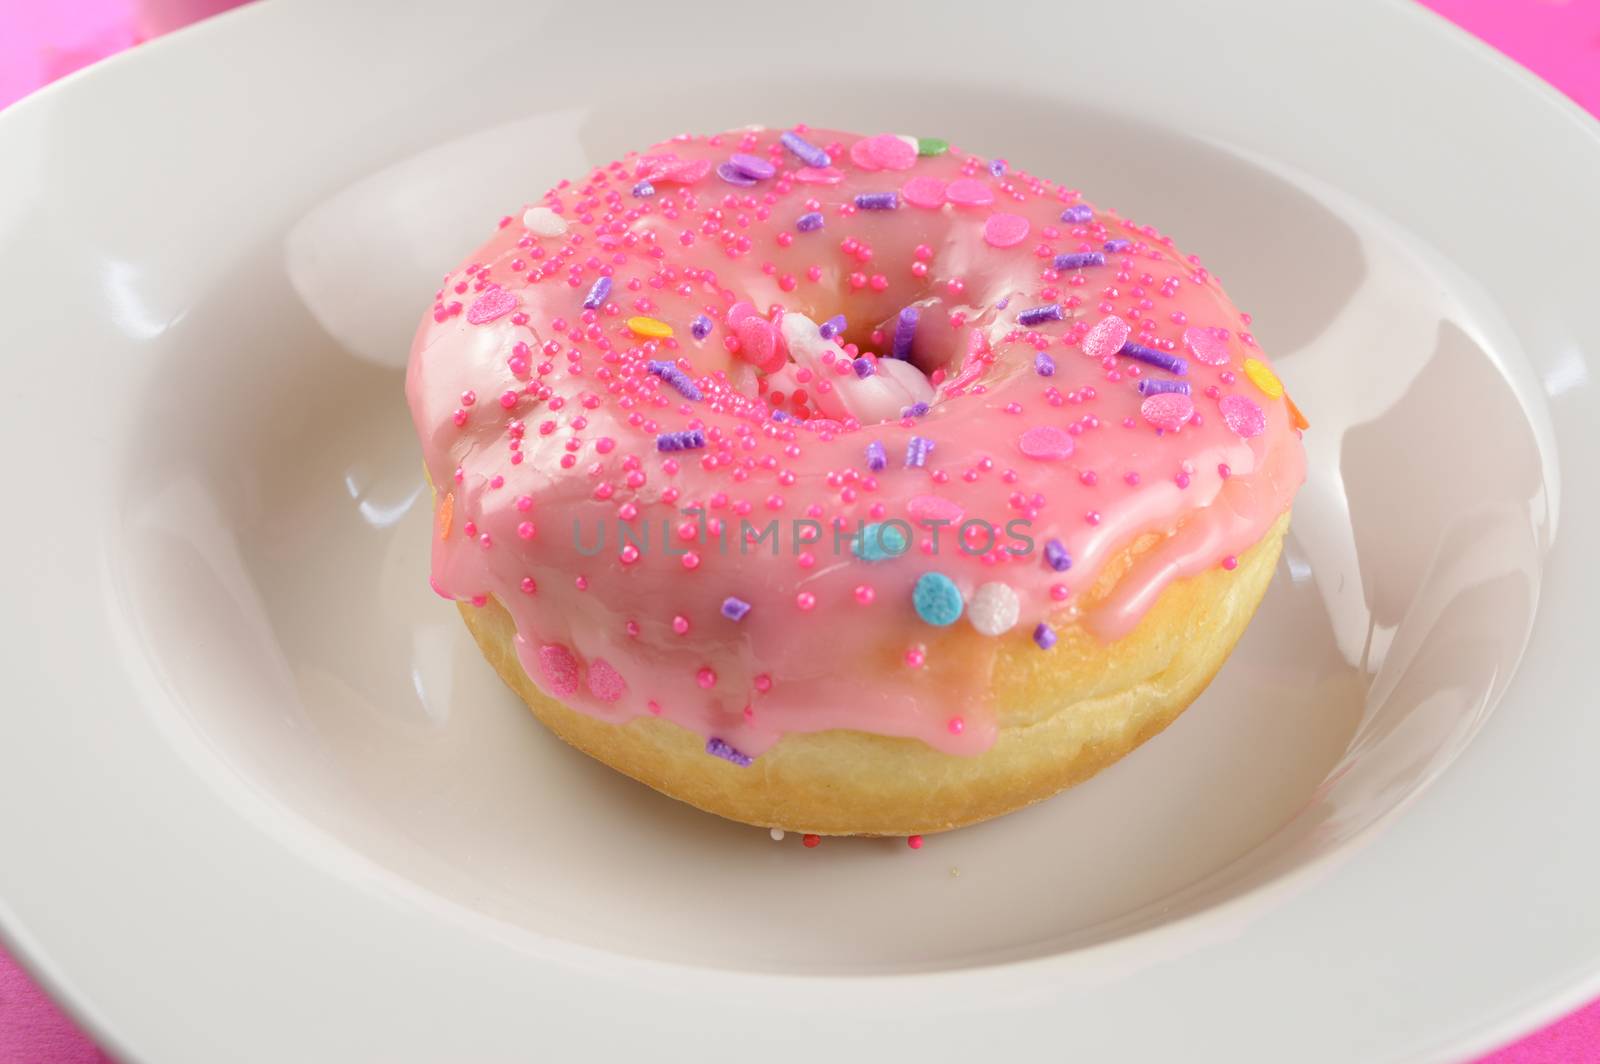 A sweet freshly baked donut invites you to take the first bite.